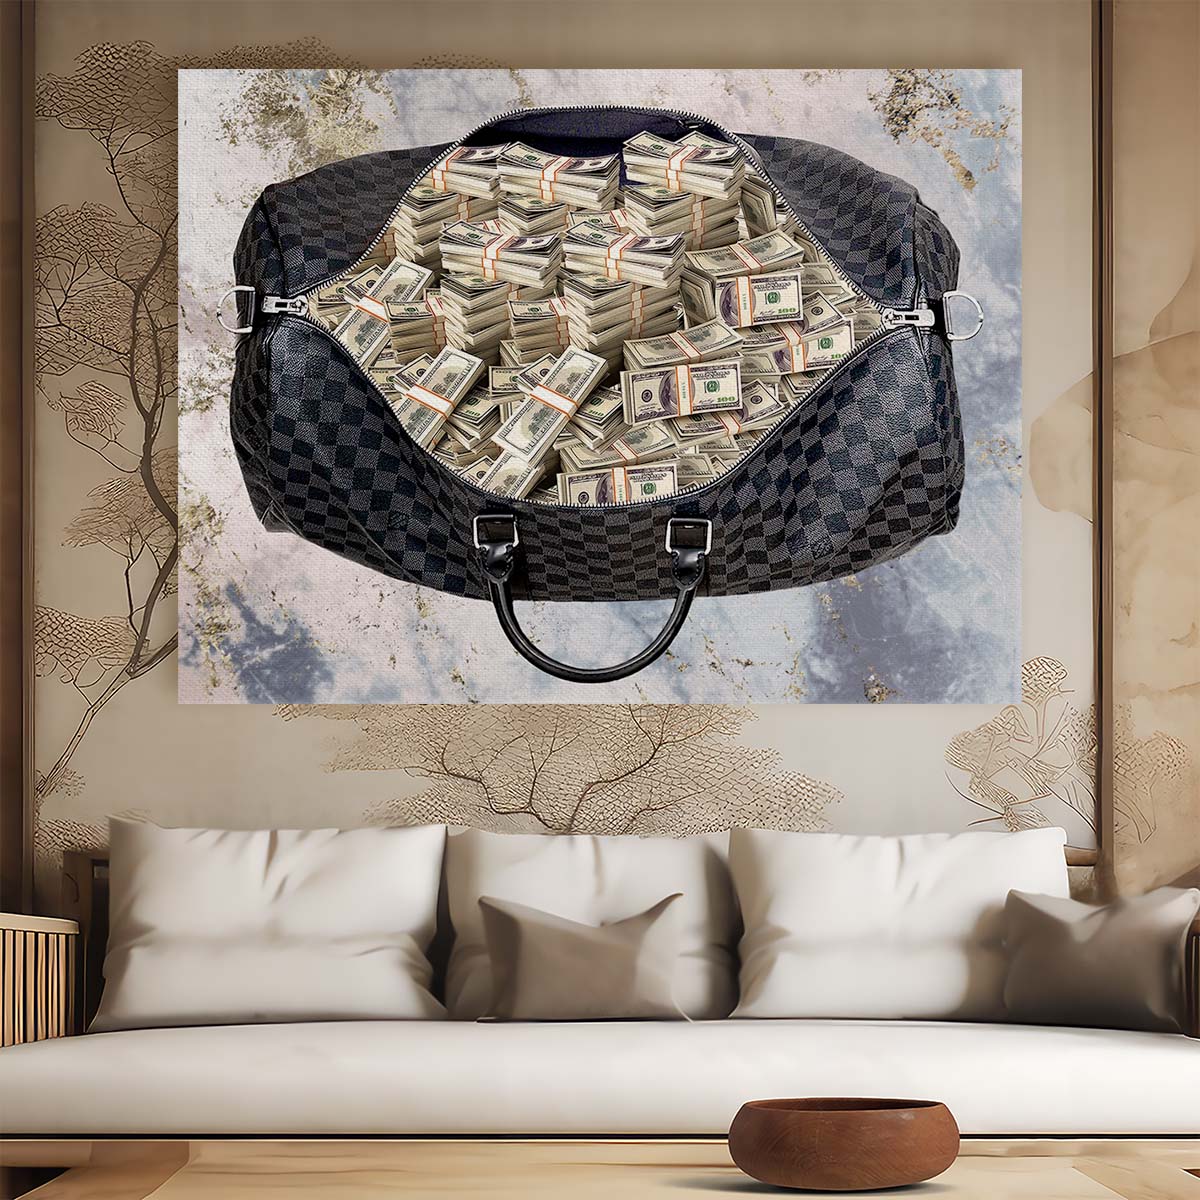 Bag Full Of Money Wall Art by Luxuriance Designs. Made in USA.